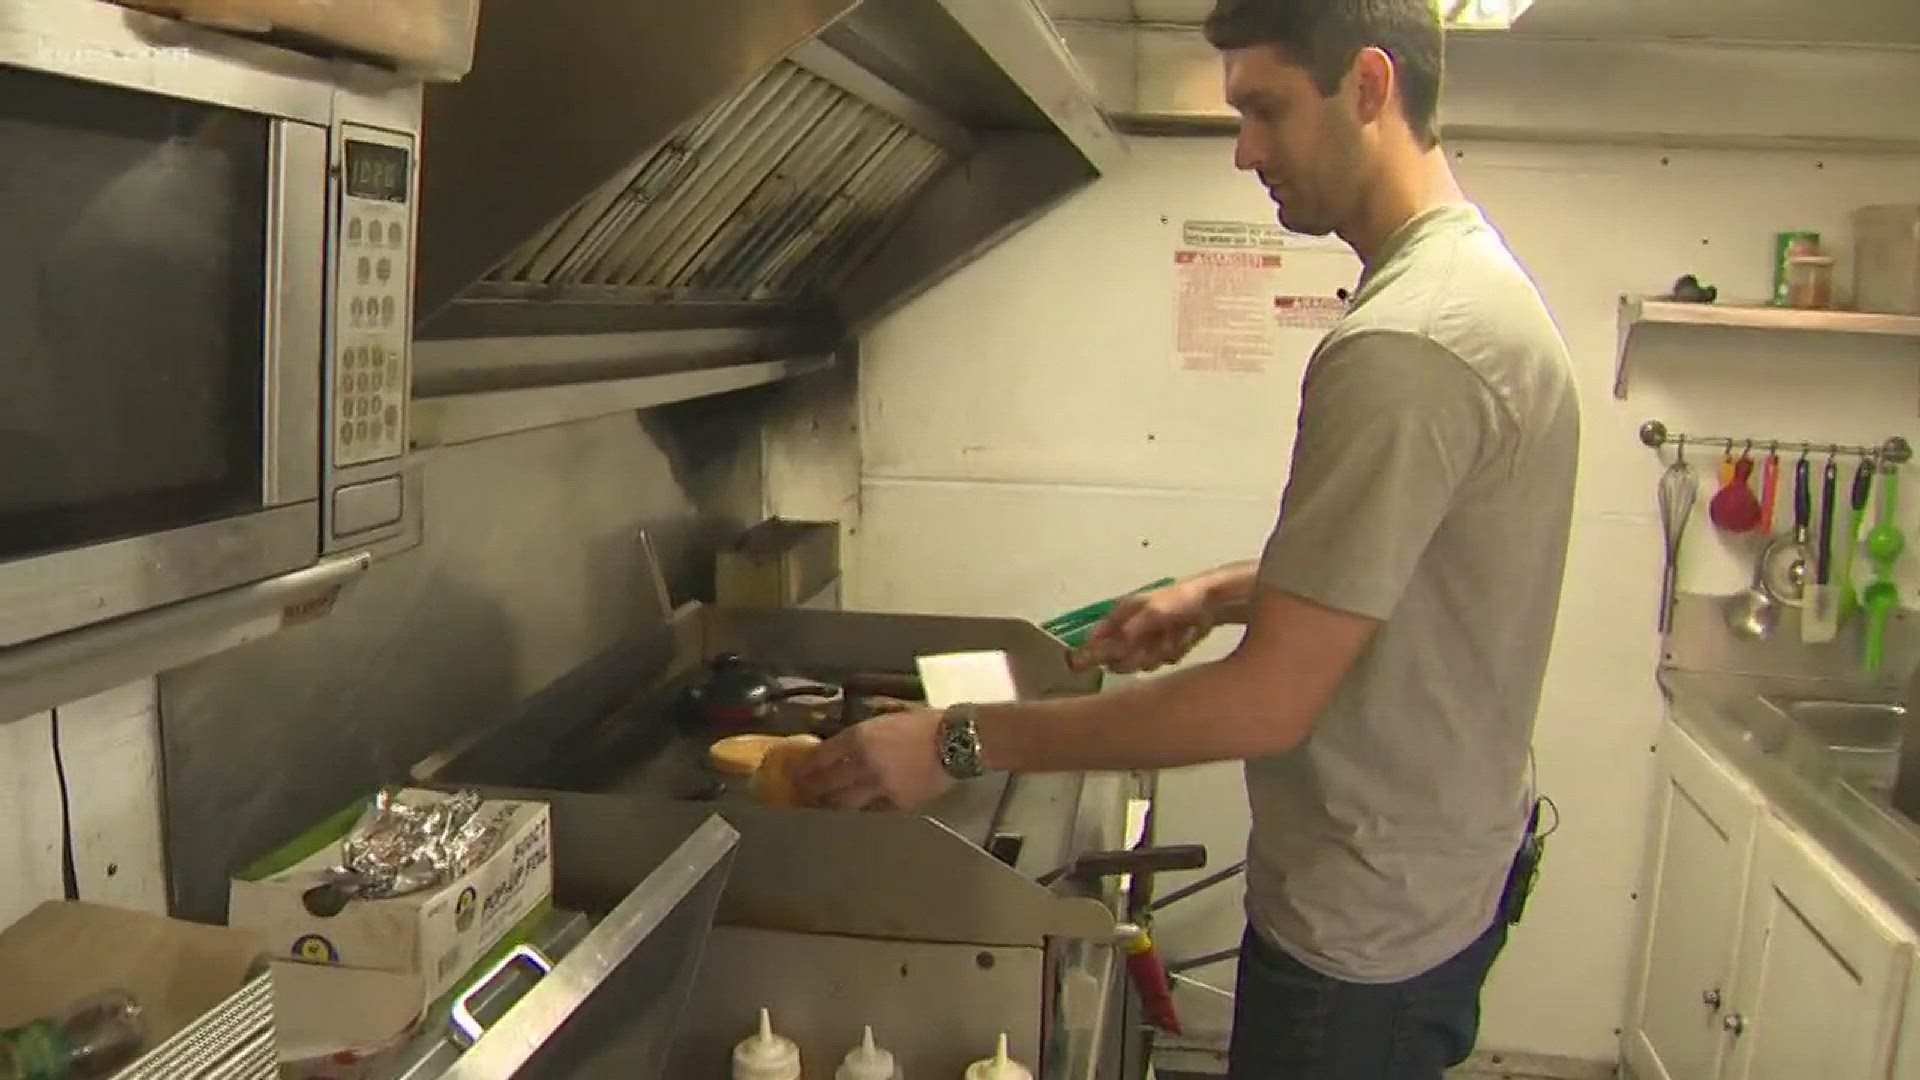 At the Cow Bells food truck on East Riverside Drive, Daniel Oliveira understands a hamburger is only as good as the ingredients that go into making it.